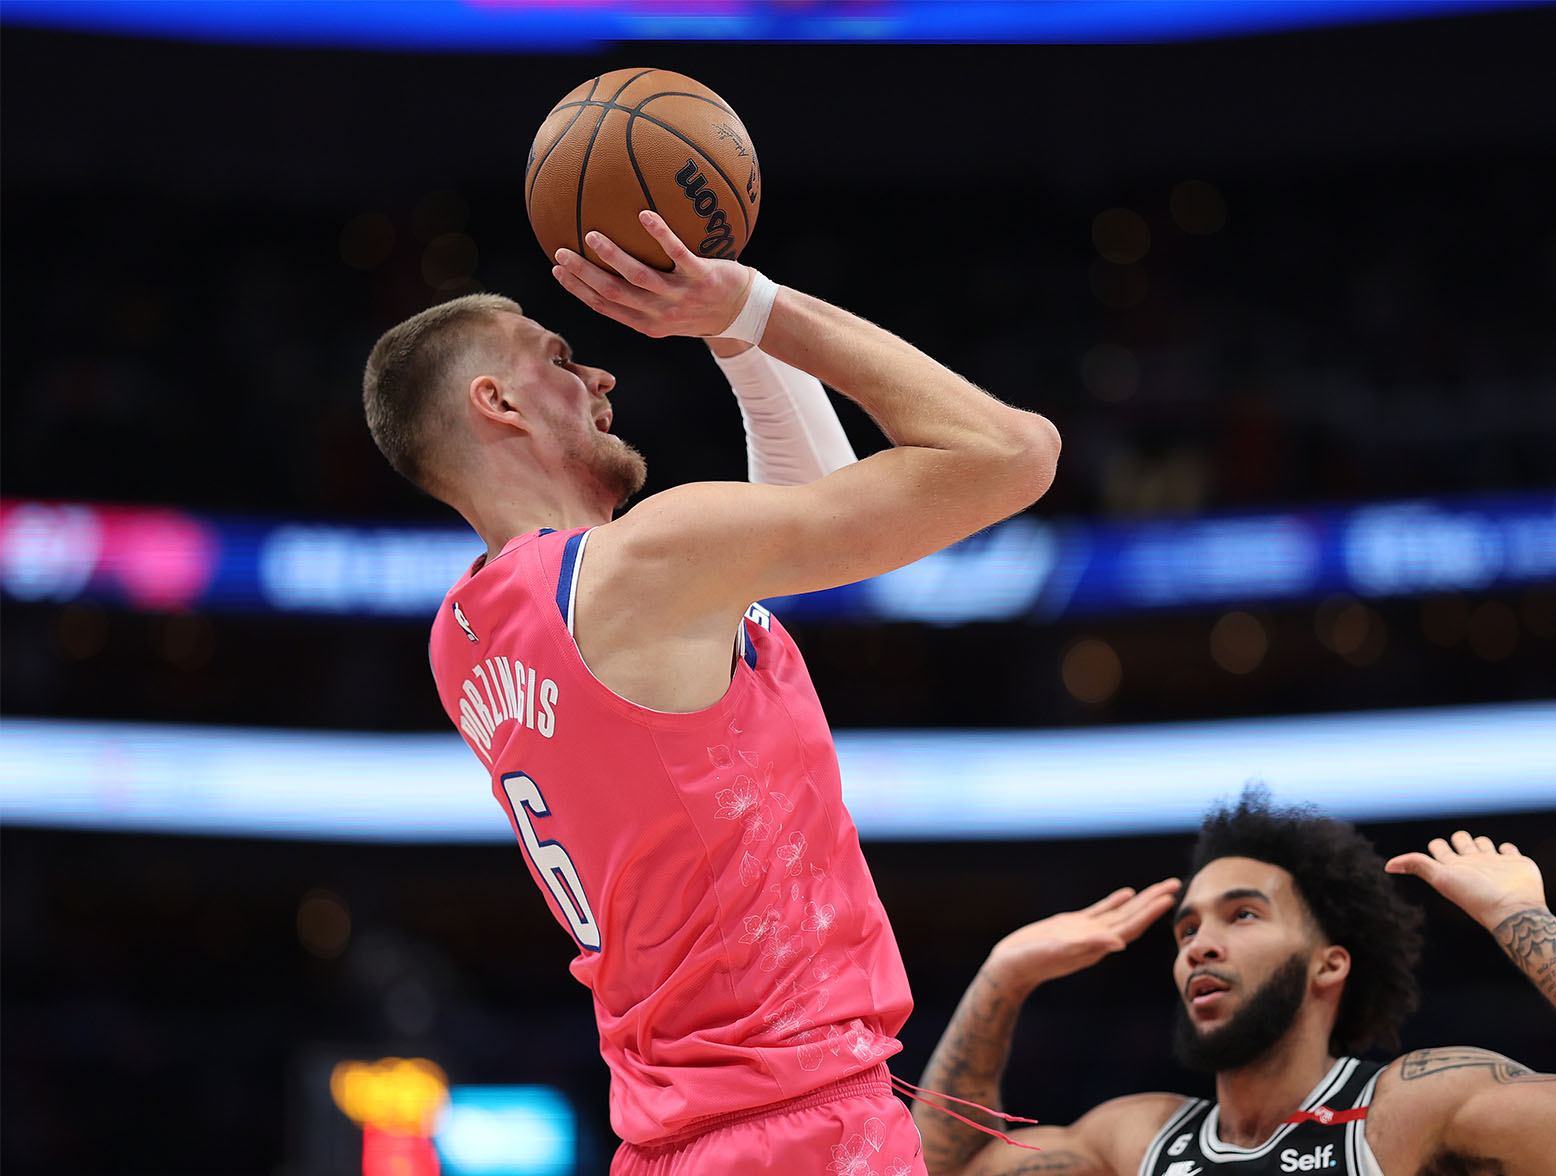 WASHINGTON, DC - MARCH 24: Kristaps Porzingis #6 of the Washington Wizards shoots against the San Antonio Spurs during the second half at Capital One Arena on March 24, 2023 in Washington, DC. NOTE TO USER: User expressly acknowledges and agrees that, by downloading and or using this photograph, User is consenting to the terms and conditions of the Getty Images License Agreement. (Photo by Patrick Smith/Getty Images)